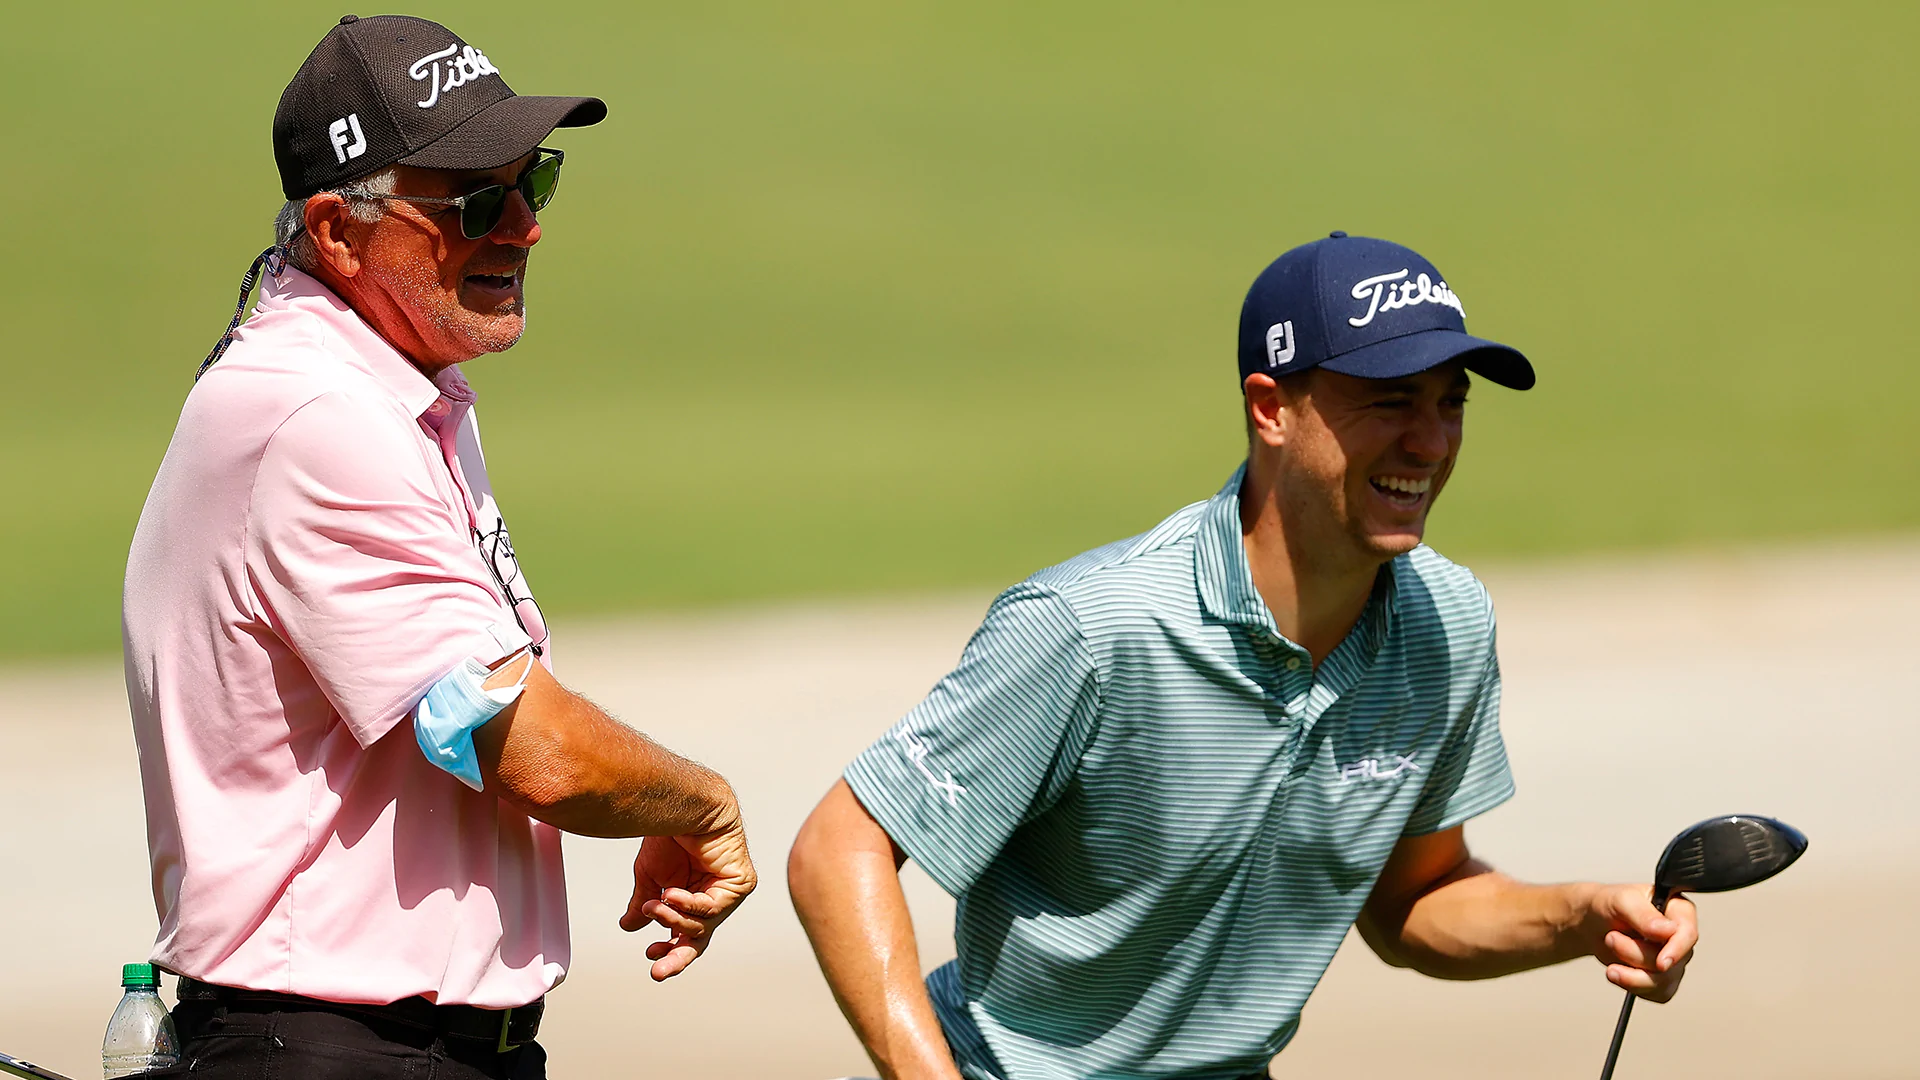 Playing with dad, against ‘trash talking’ Woodses at PNC will bring pressure for Justin Thomas